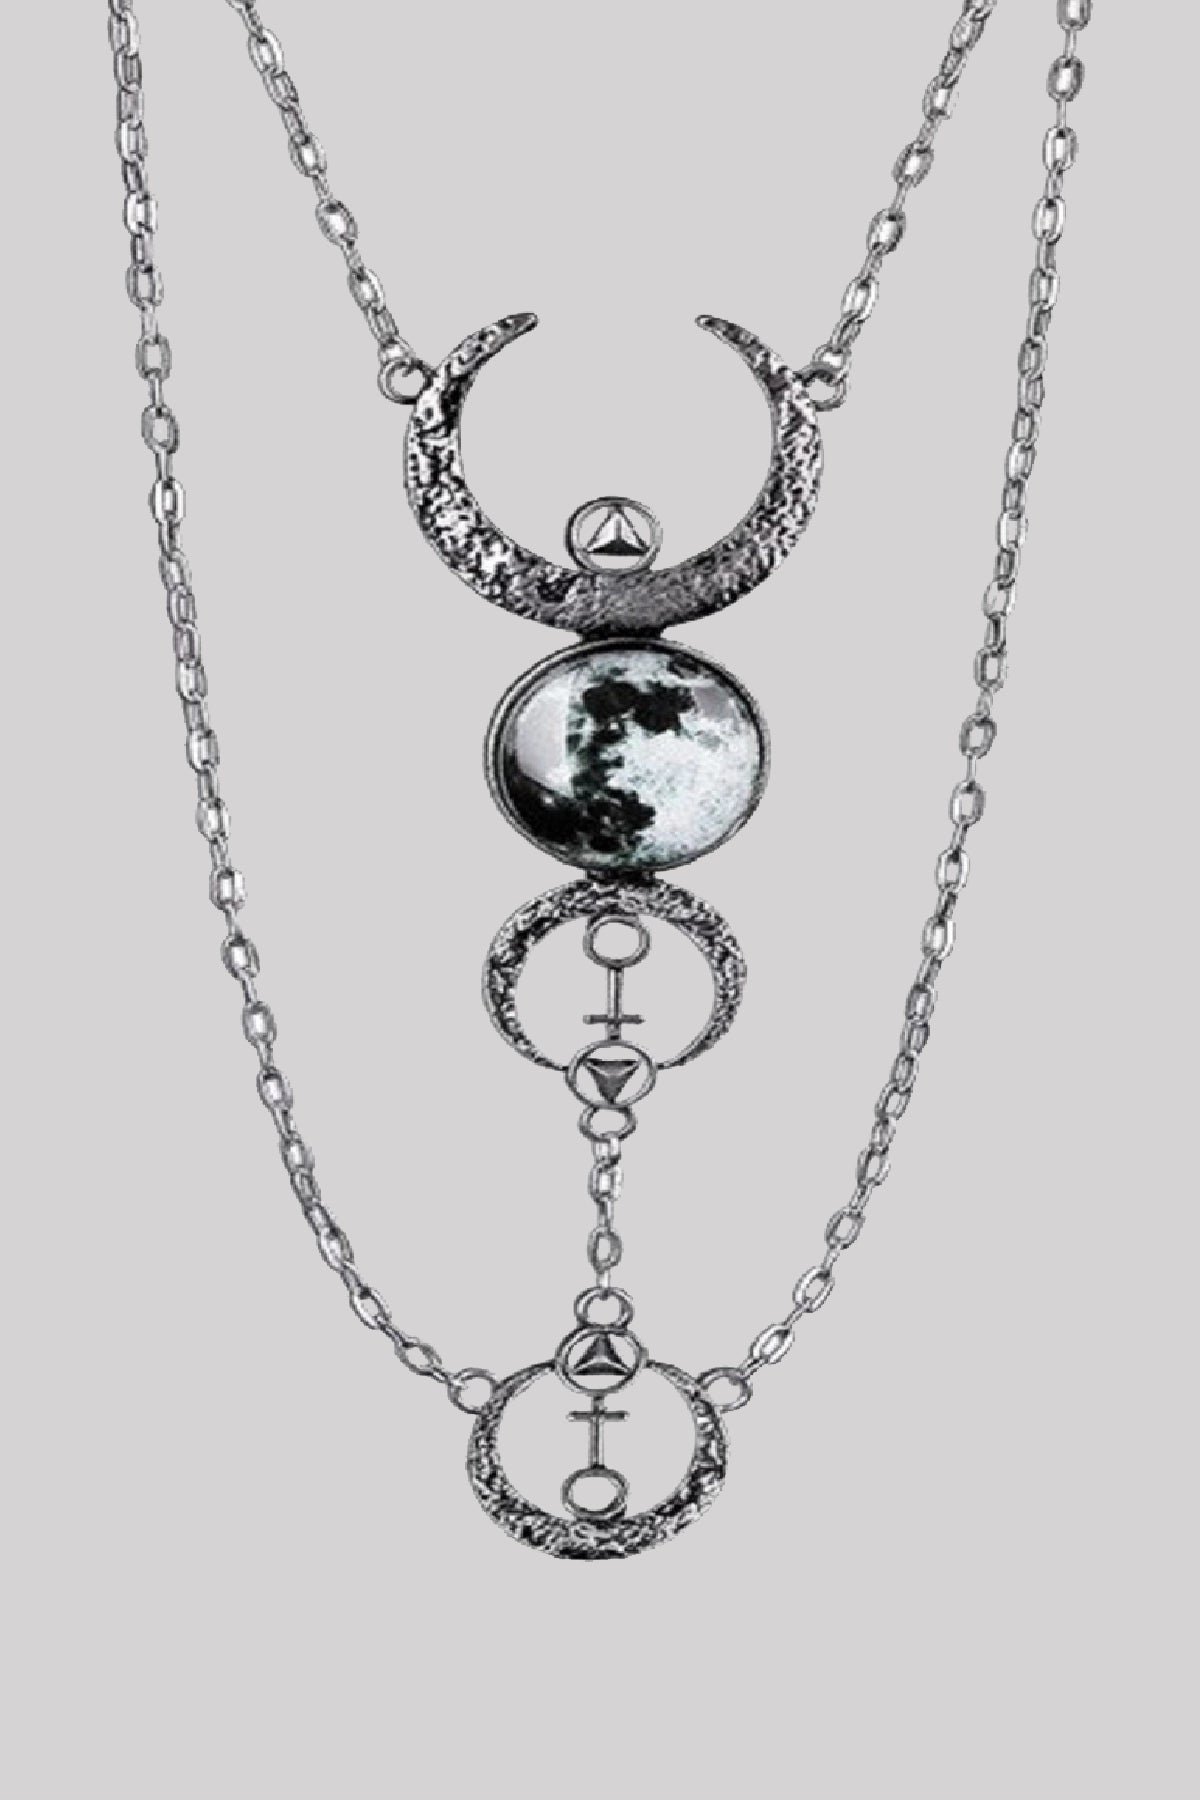 Restyle Full Moon Crescent Long Pendant Wicca Luna Necklace